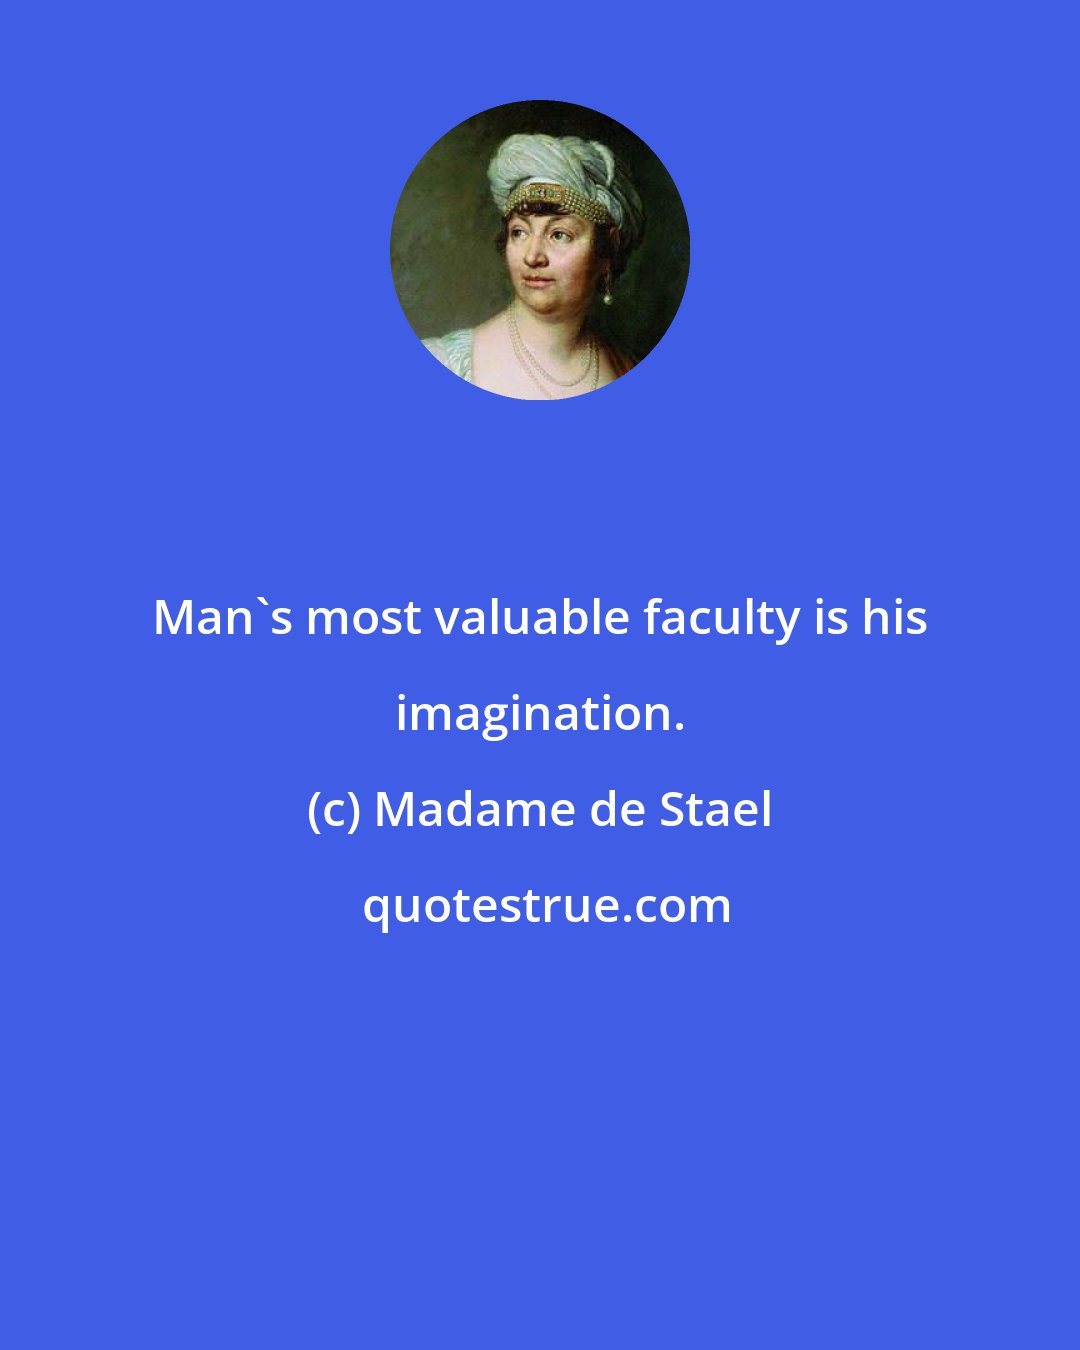 Madame de Stael: Man's most valuable faculty is his imagination.